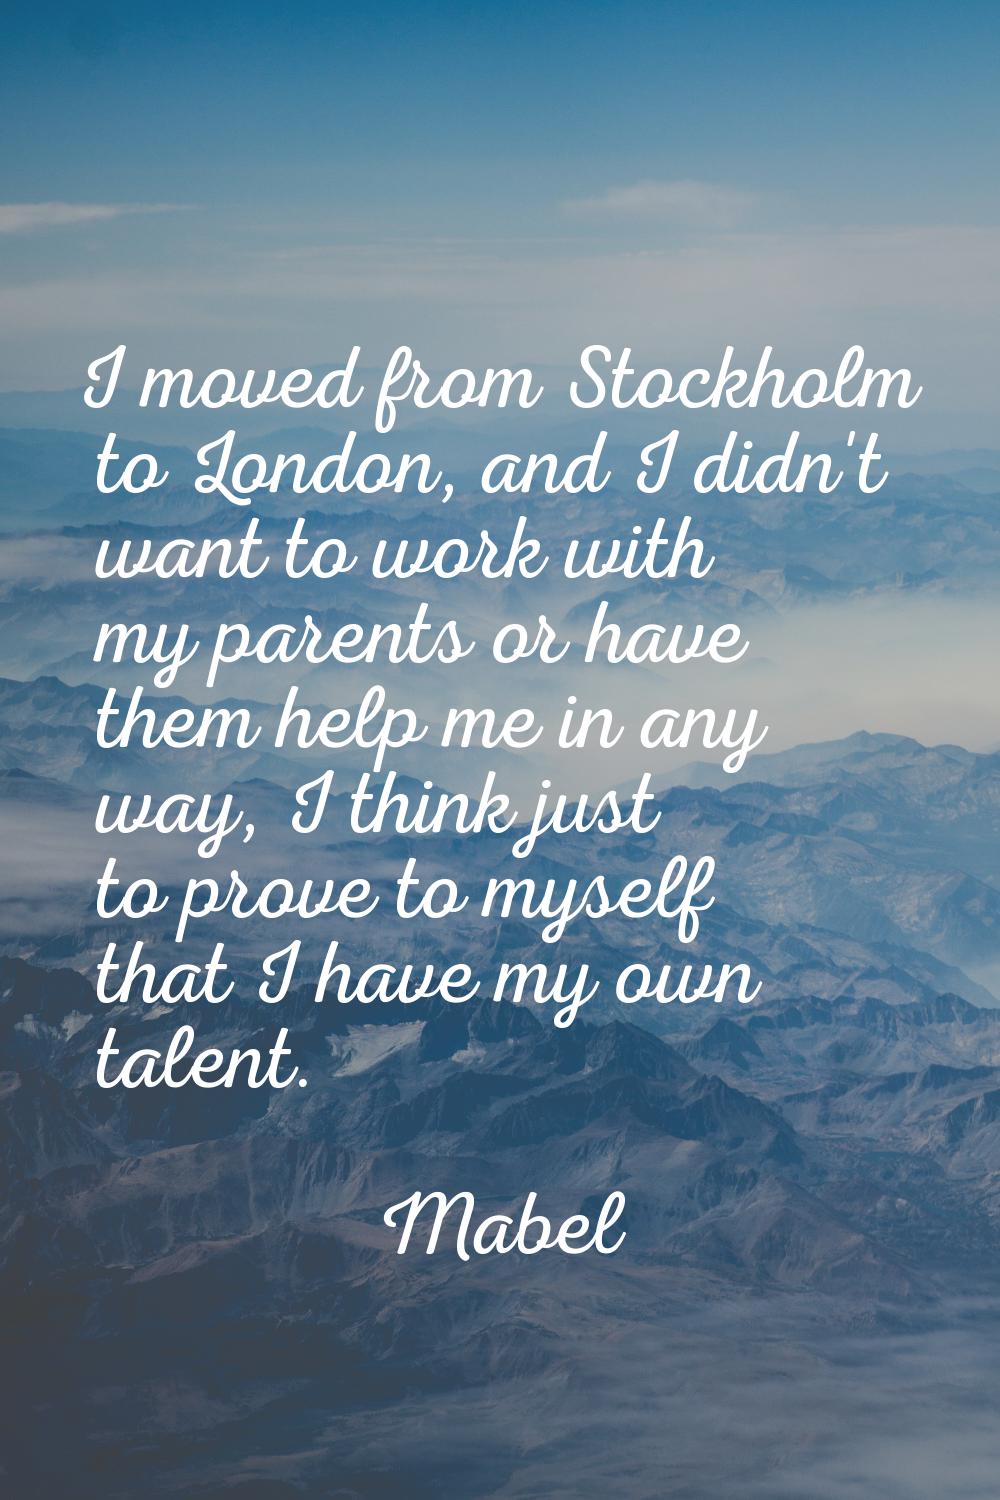 I moved from Stockholm to London, and I didn't want to work with my parents or have them help me in